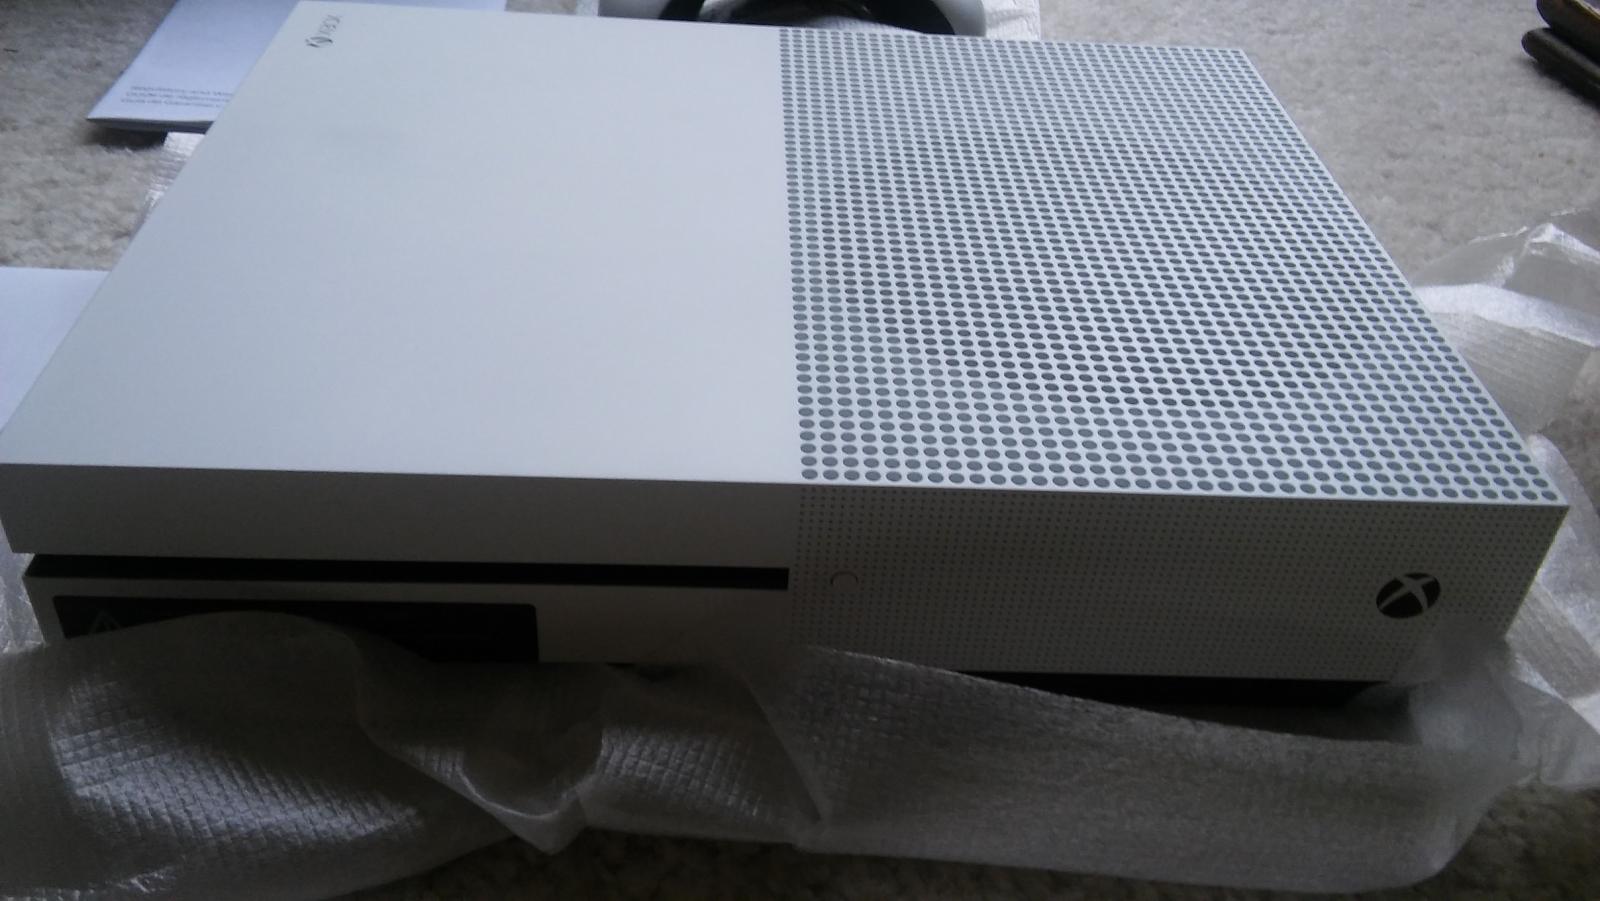 For sale Xbox One S